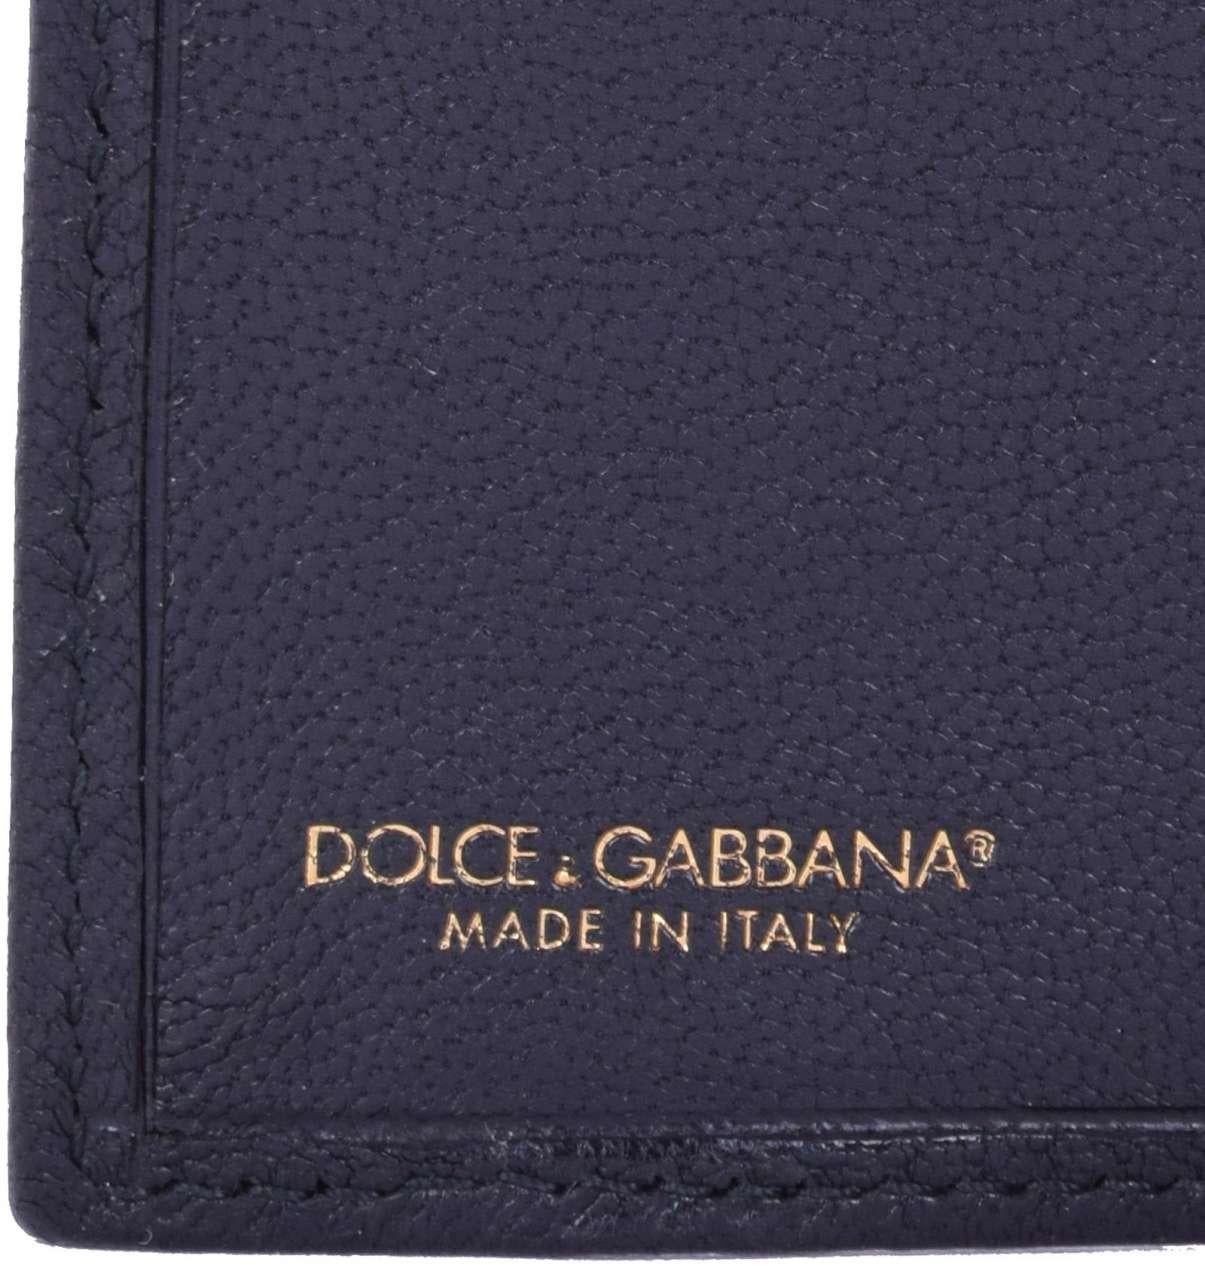 - Leopard Printed Monogram Tablet Case by DOLCE & GABBANA Black Label - New with Tag - Former RRP: EUR 480 - Material: 60% PVC, 20% Cotton, 11% Calf Leather, 9% Polyurethan - Engraved logo plaque at front - Elastic strap closure - Top stand holder -